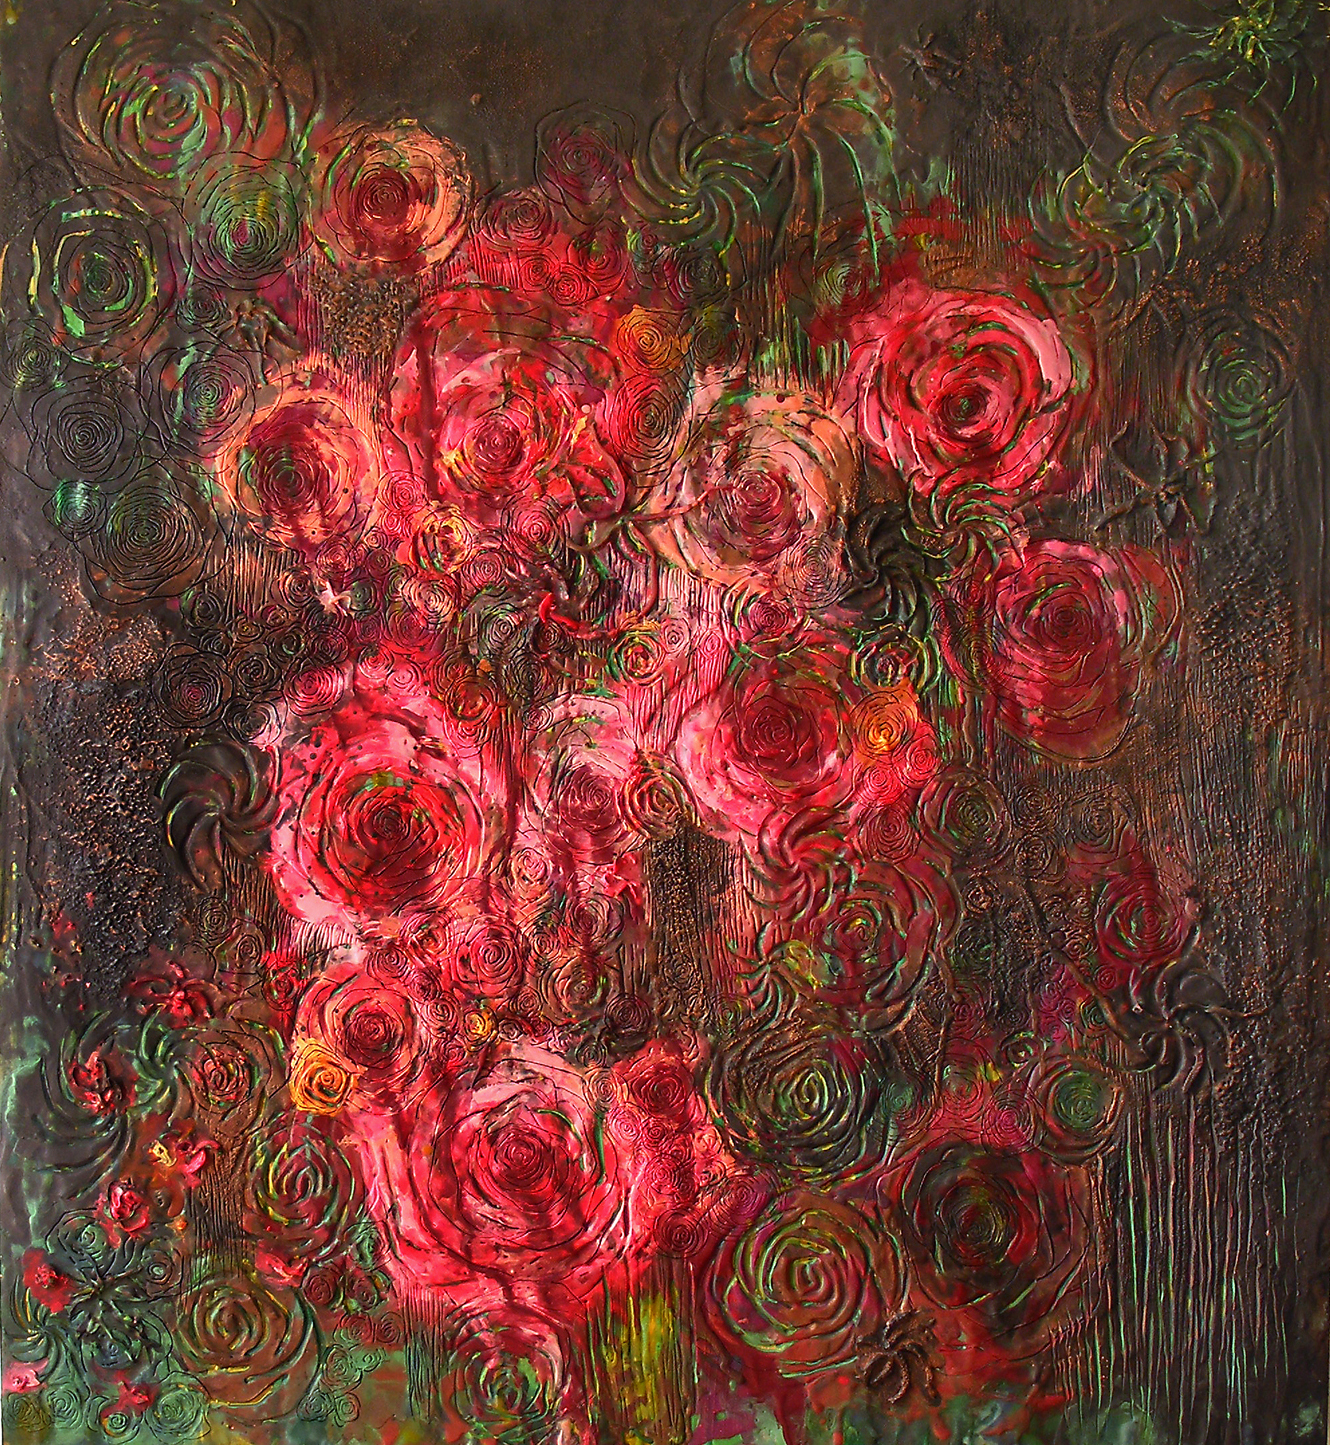 Roses, Ghosts, and Galaxies, 2007, encaustic on panel, 66 x 60 inches